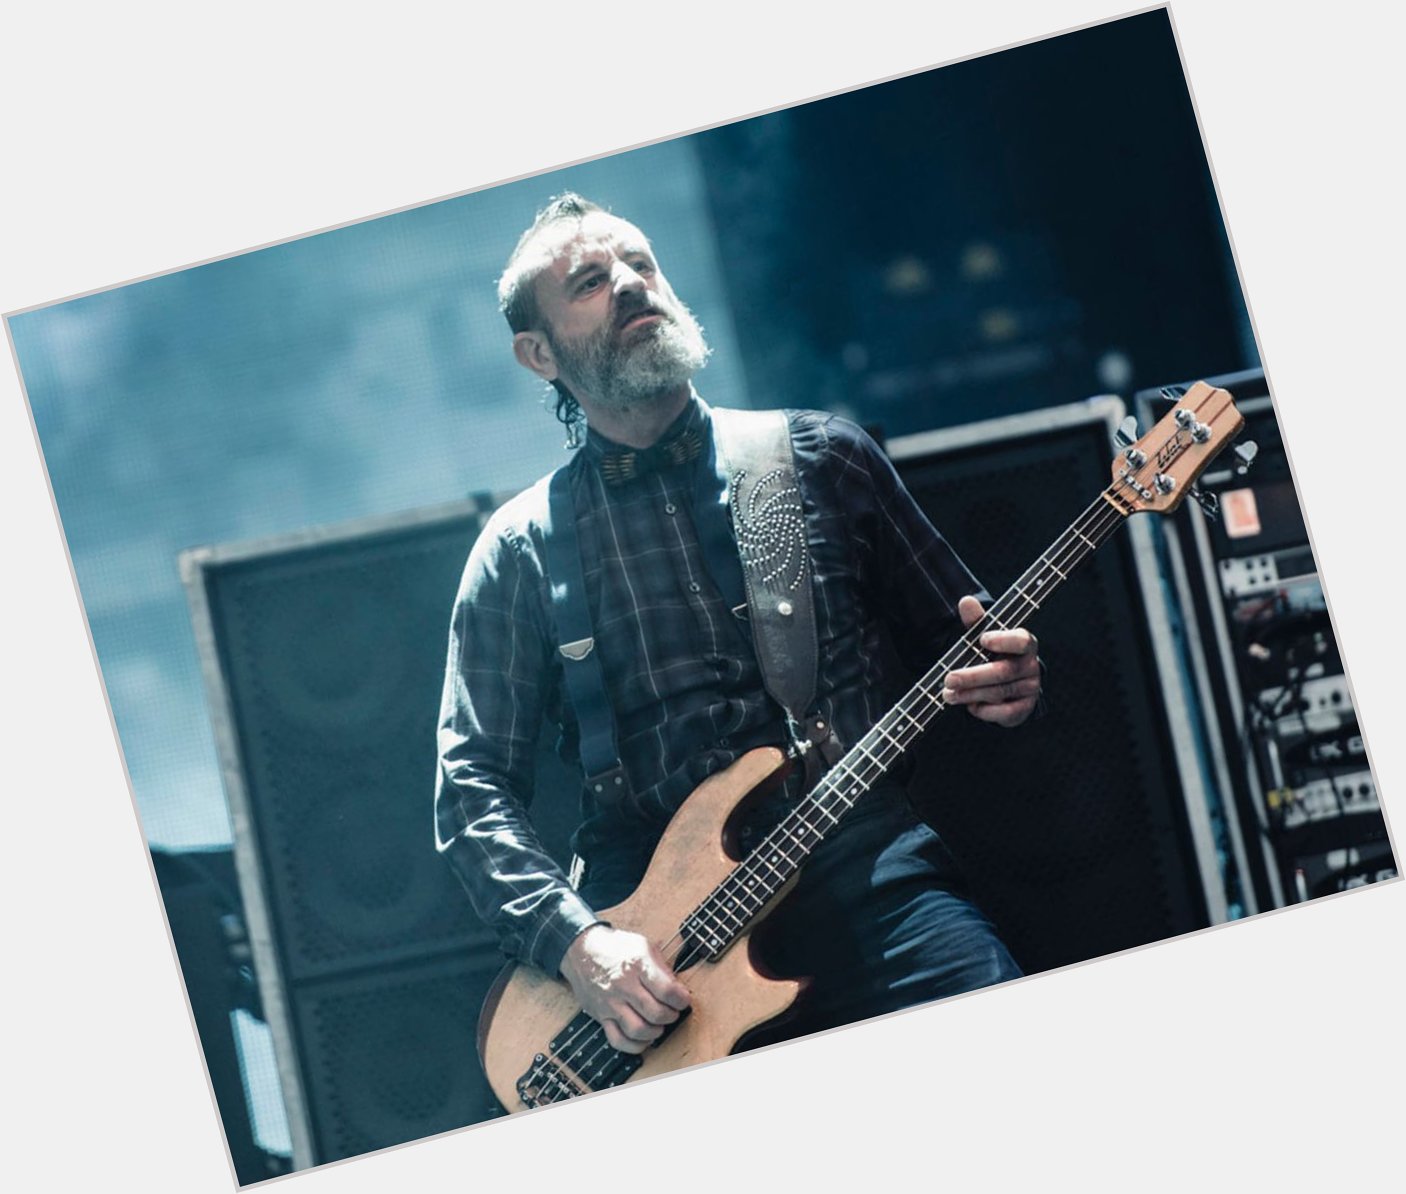 Wishing Justin Chancellor a very Happy Birthday today =) 